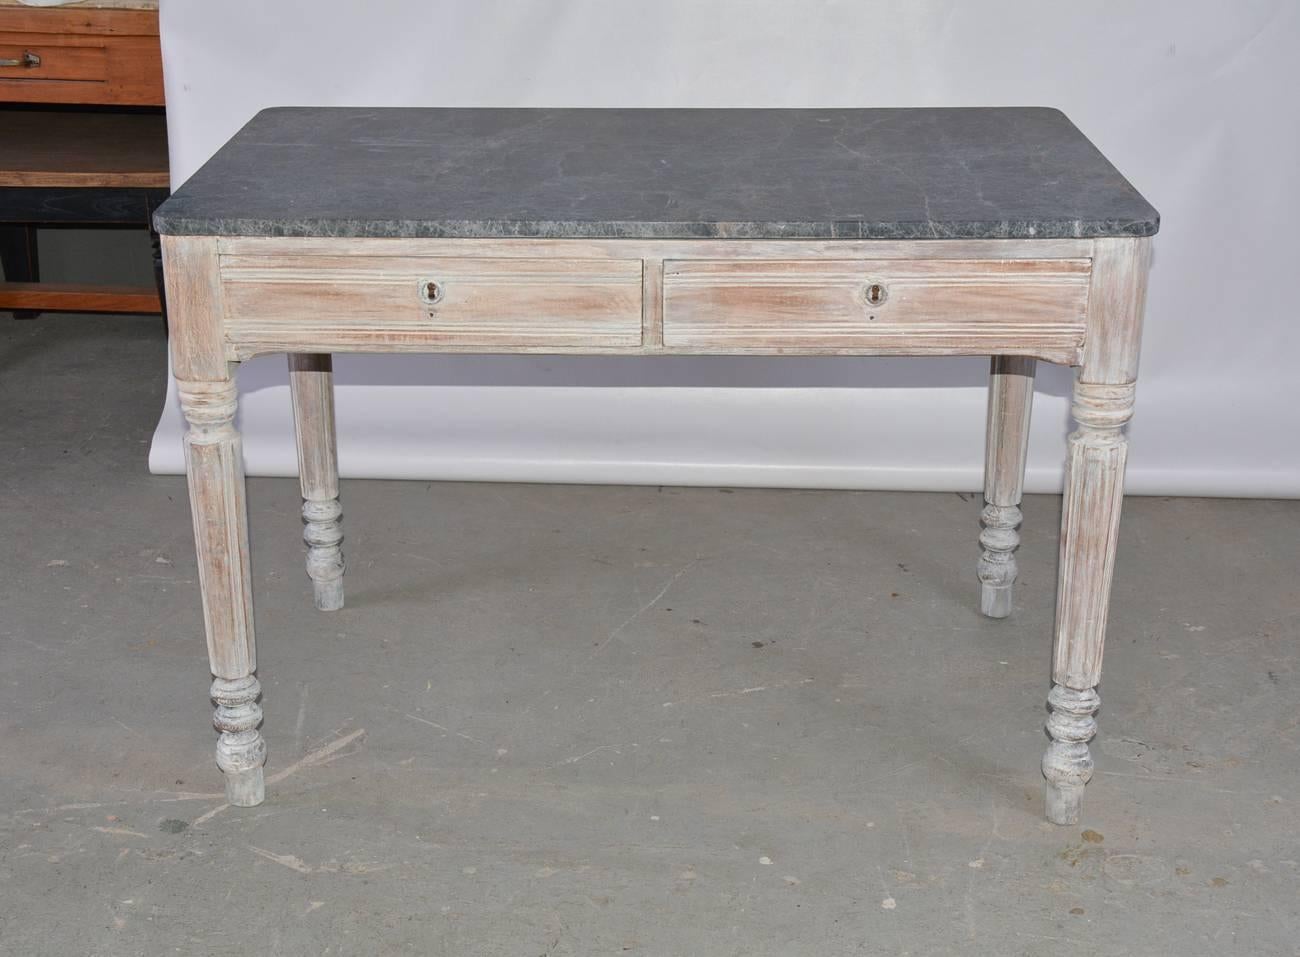 The antique country marble-top desk has two deep drawers, fluted and turned legs and the look of a white-washed finish. The drawers have key holes but no key.

.